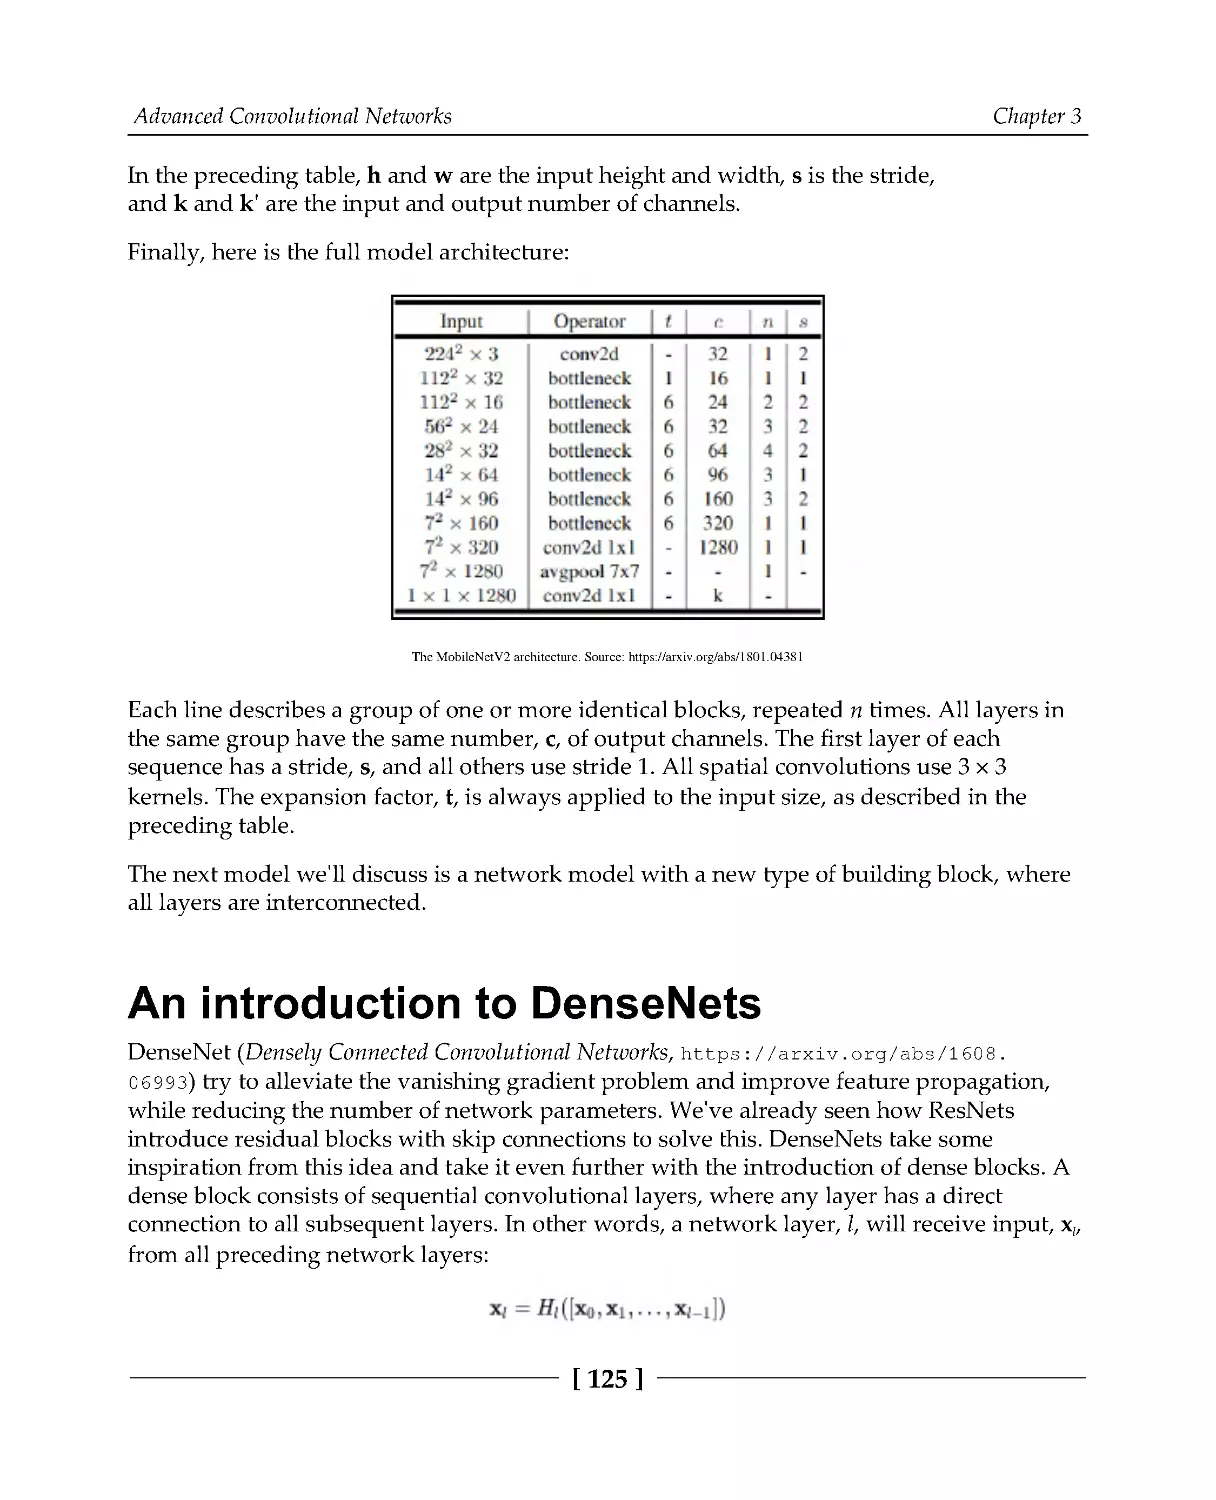 An introduction to DenseNets